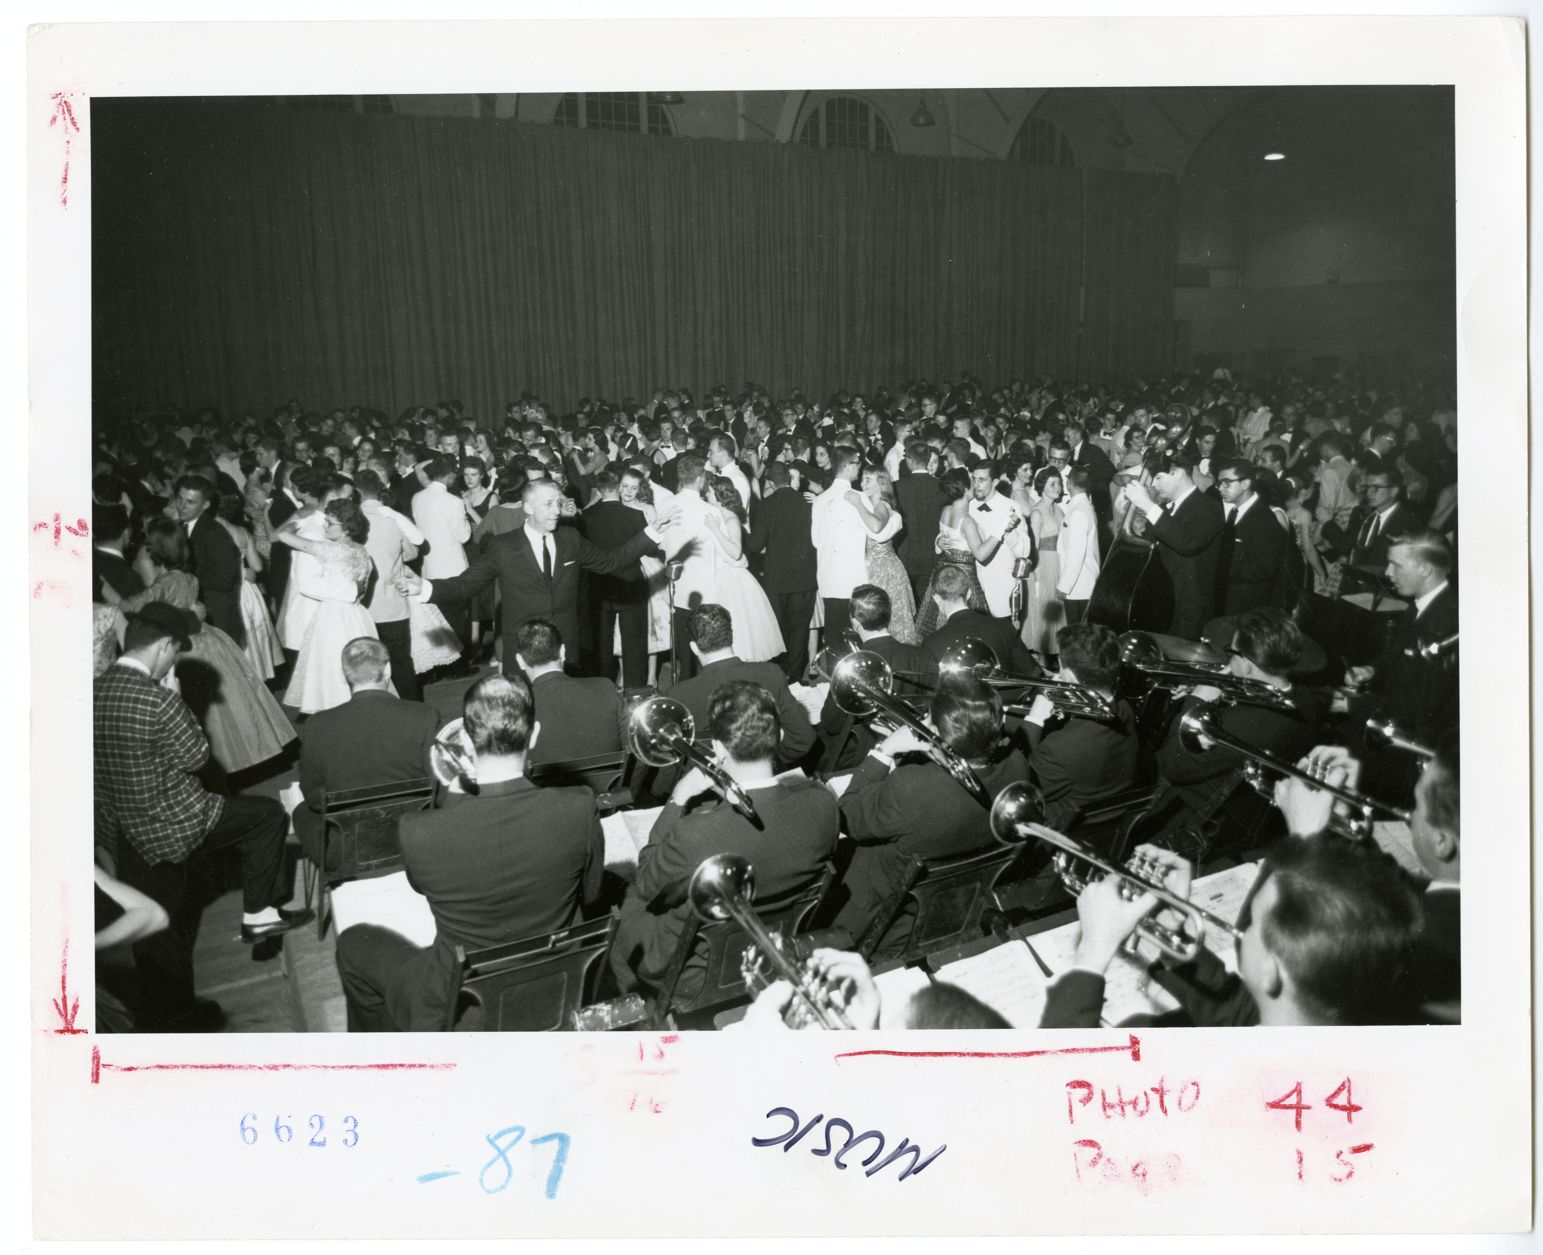 A view from behind the Stan Kenton Band as they perform in a gymnasium full of dancing college students, during Spring Formal. Written upside down on the front of the photograph: "Music." Written on the back of the photograph: "Spring Formal 1959, Stan Kenton Band," and typed on a sticker: "Music: instrumental."